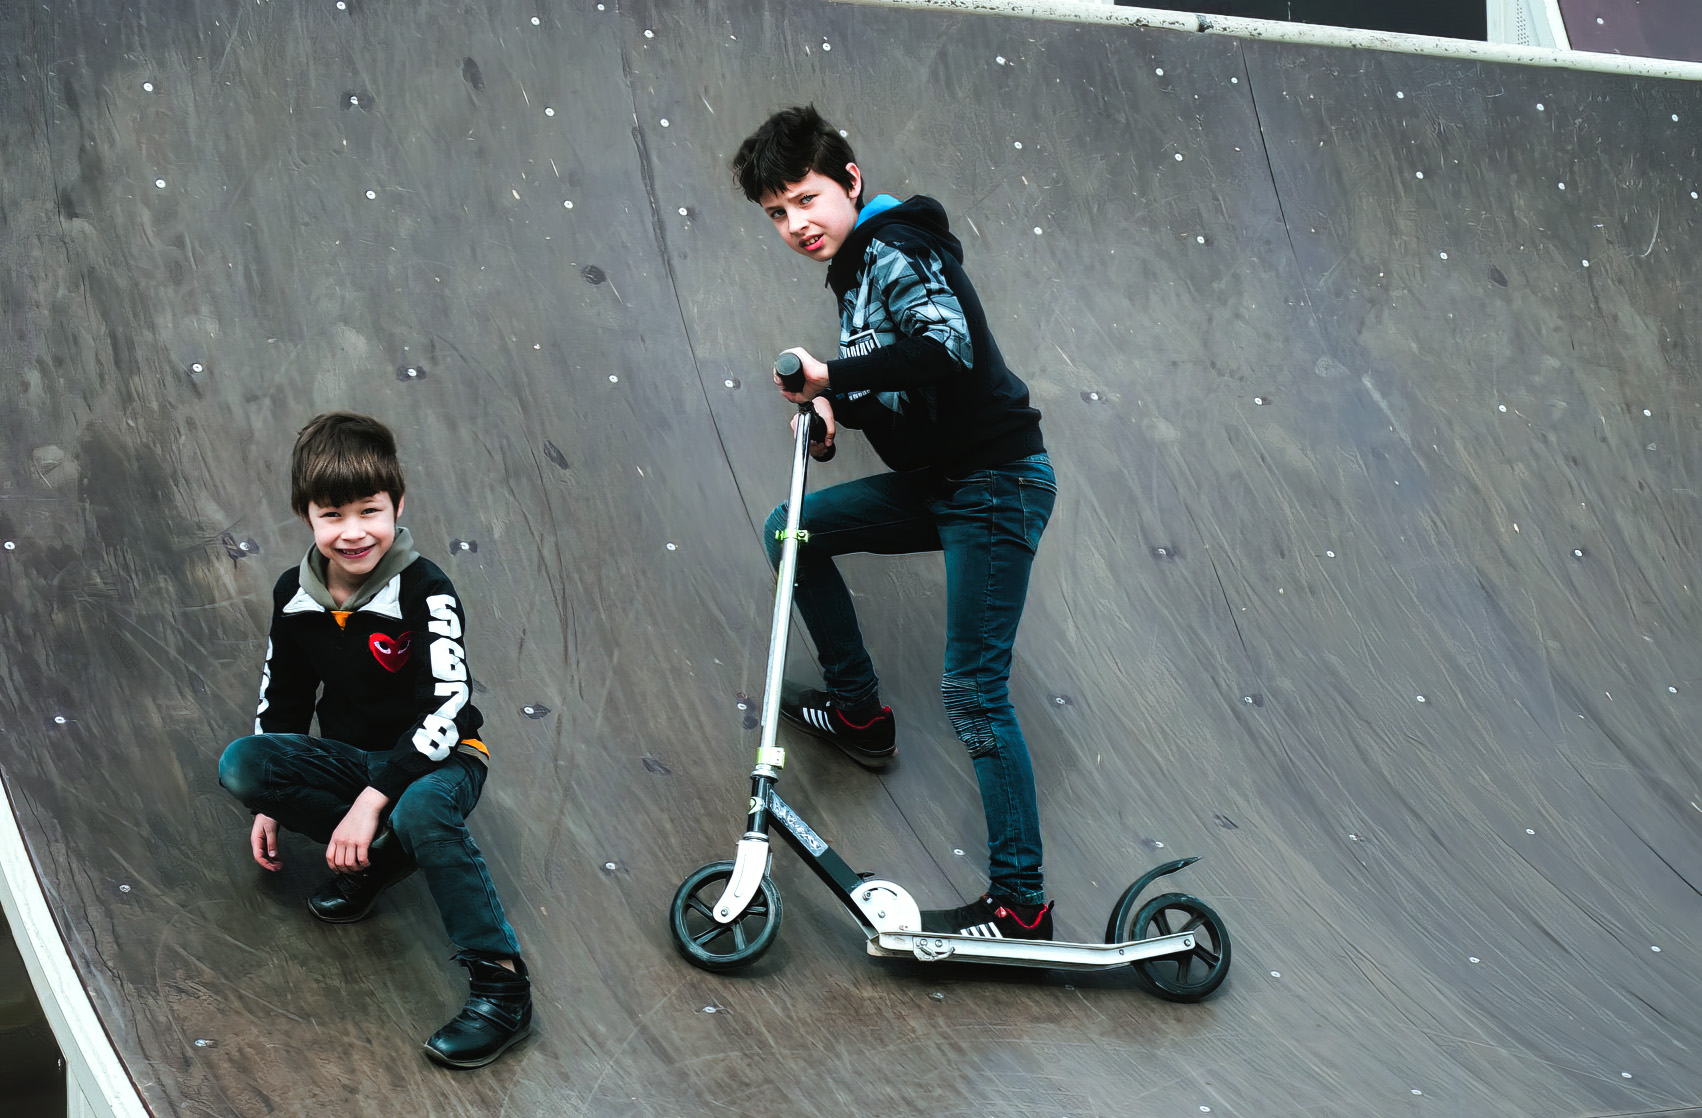 Watch out, world - these kids are tearing up the stunt scooter circuit! (Photo: Unsplash)